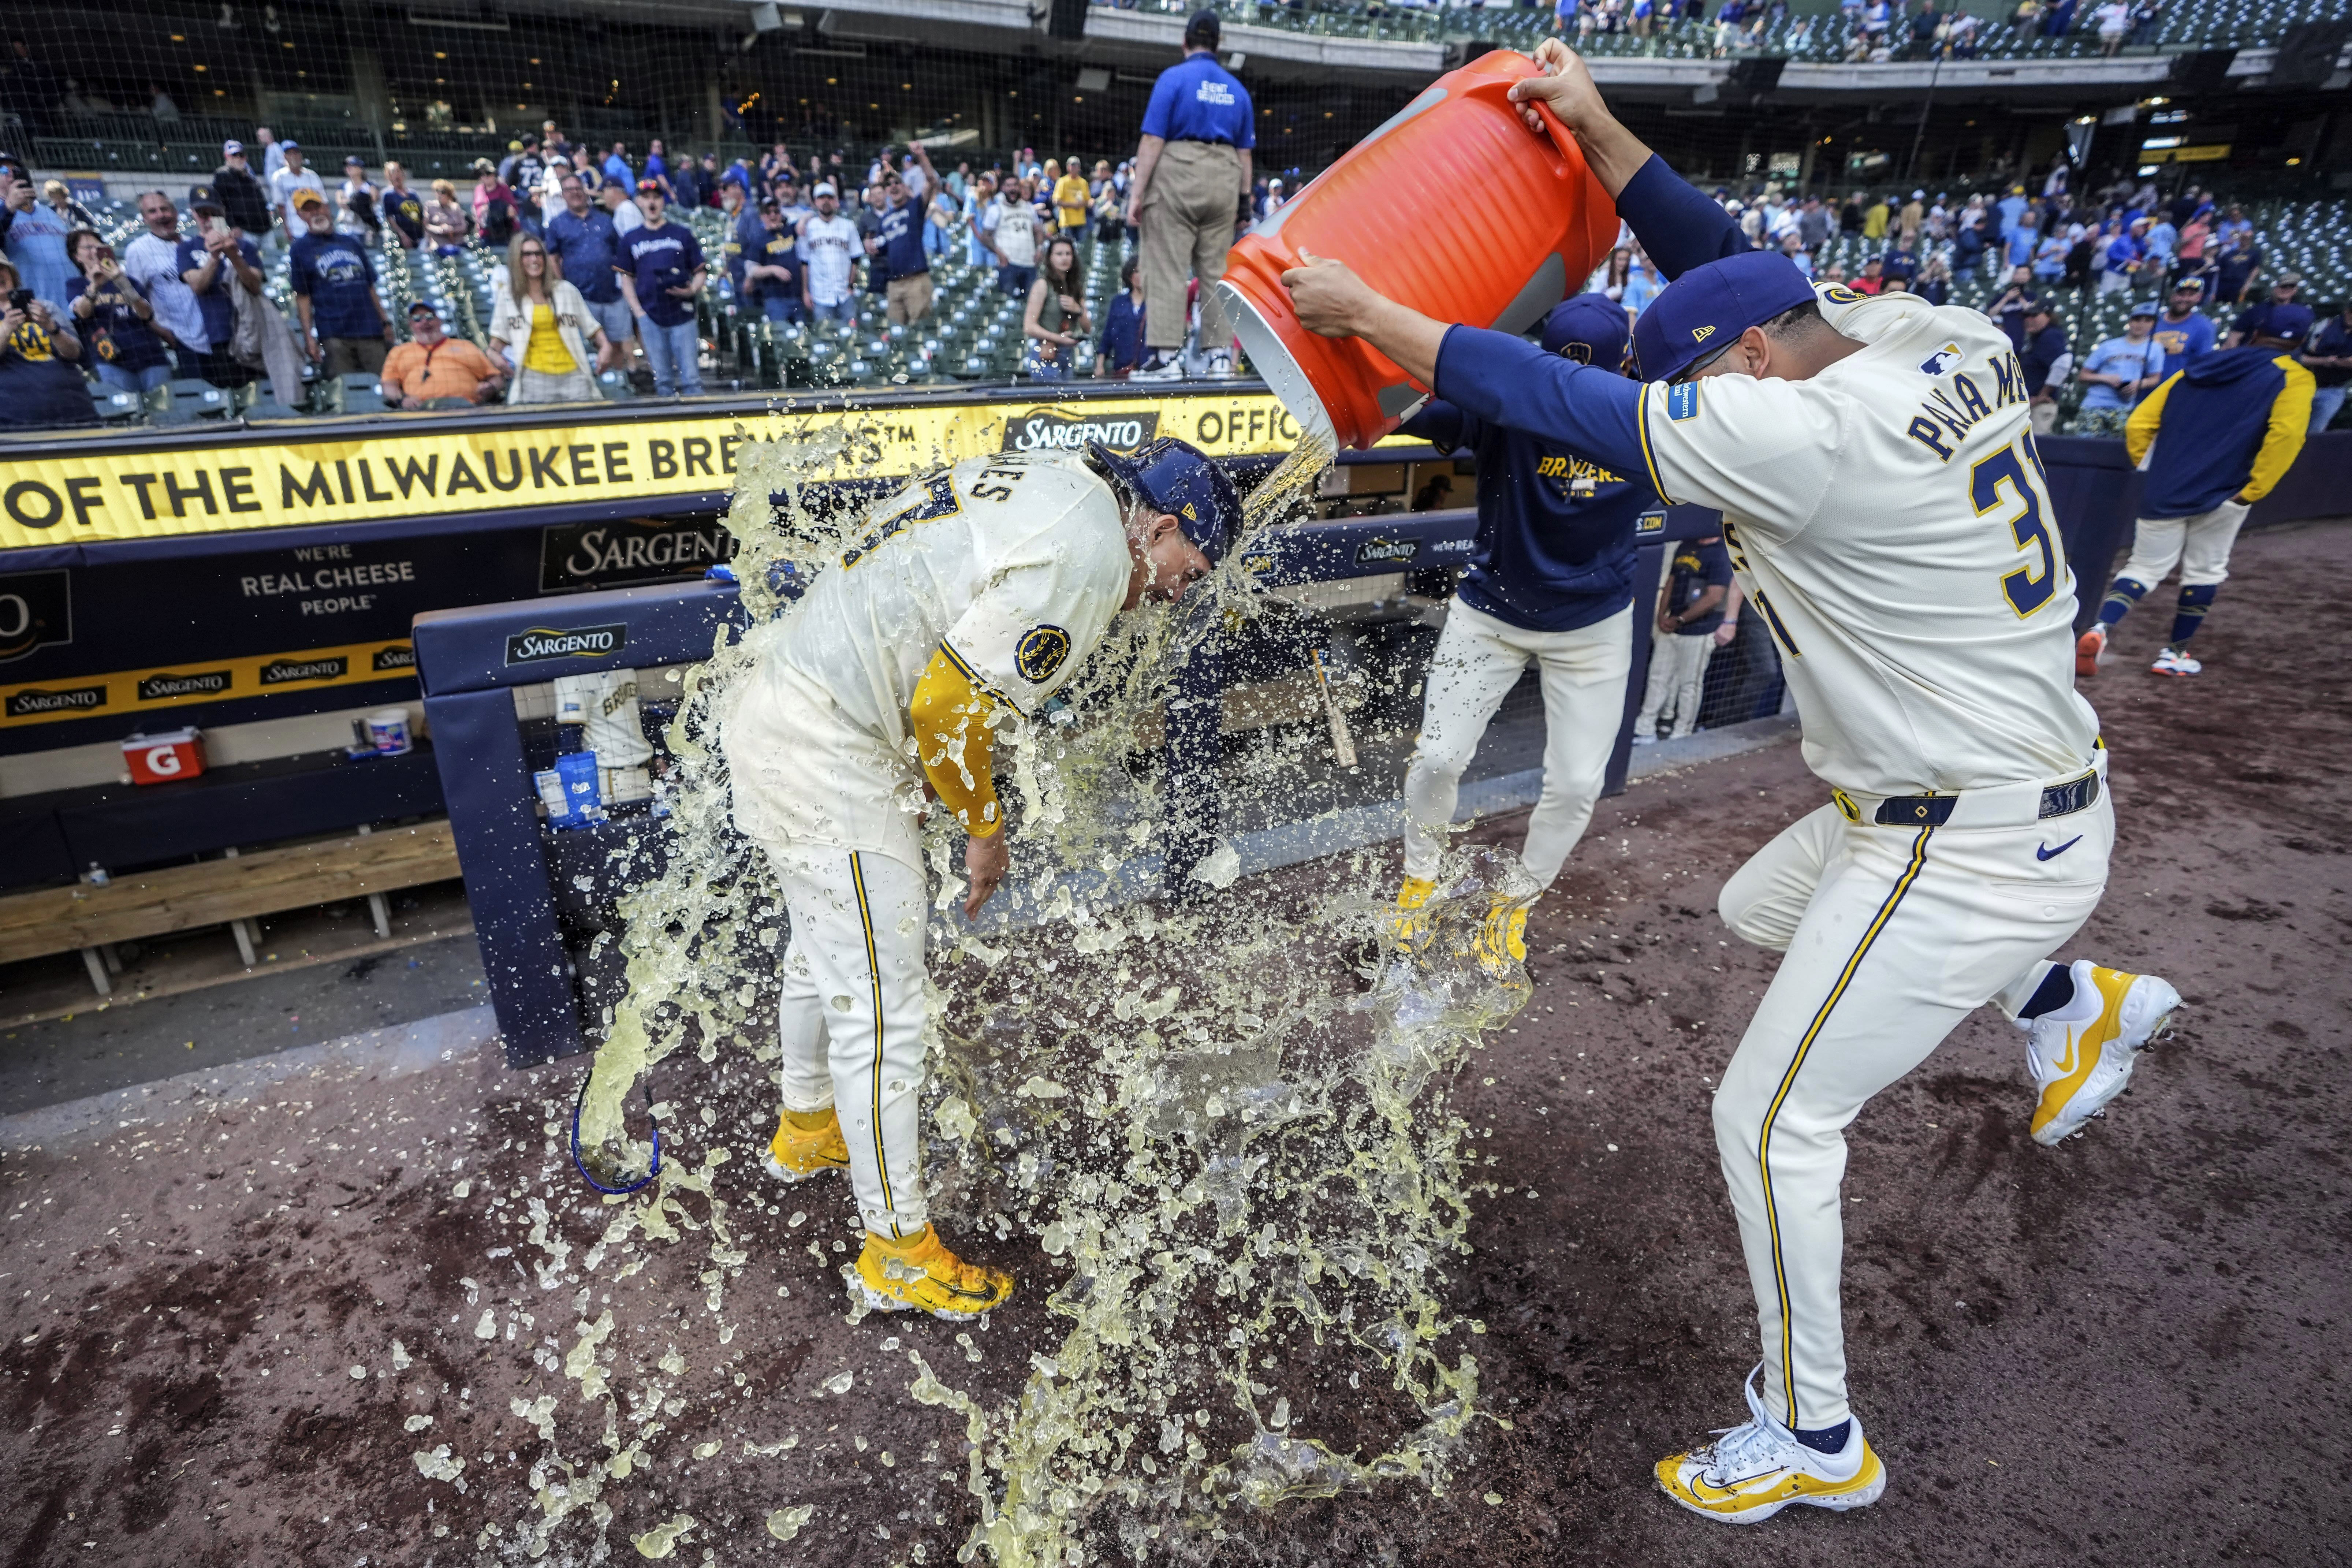 Adames homers twice with 4 RBIs, Brewers beat Rays 7-1 to take 2 of 3 in contentious series